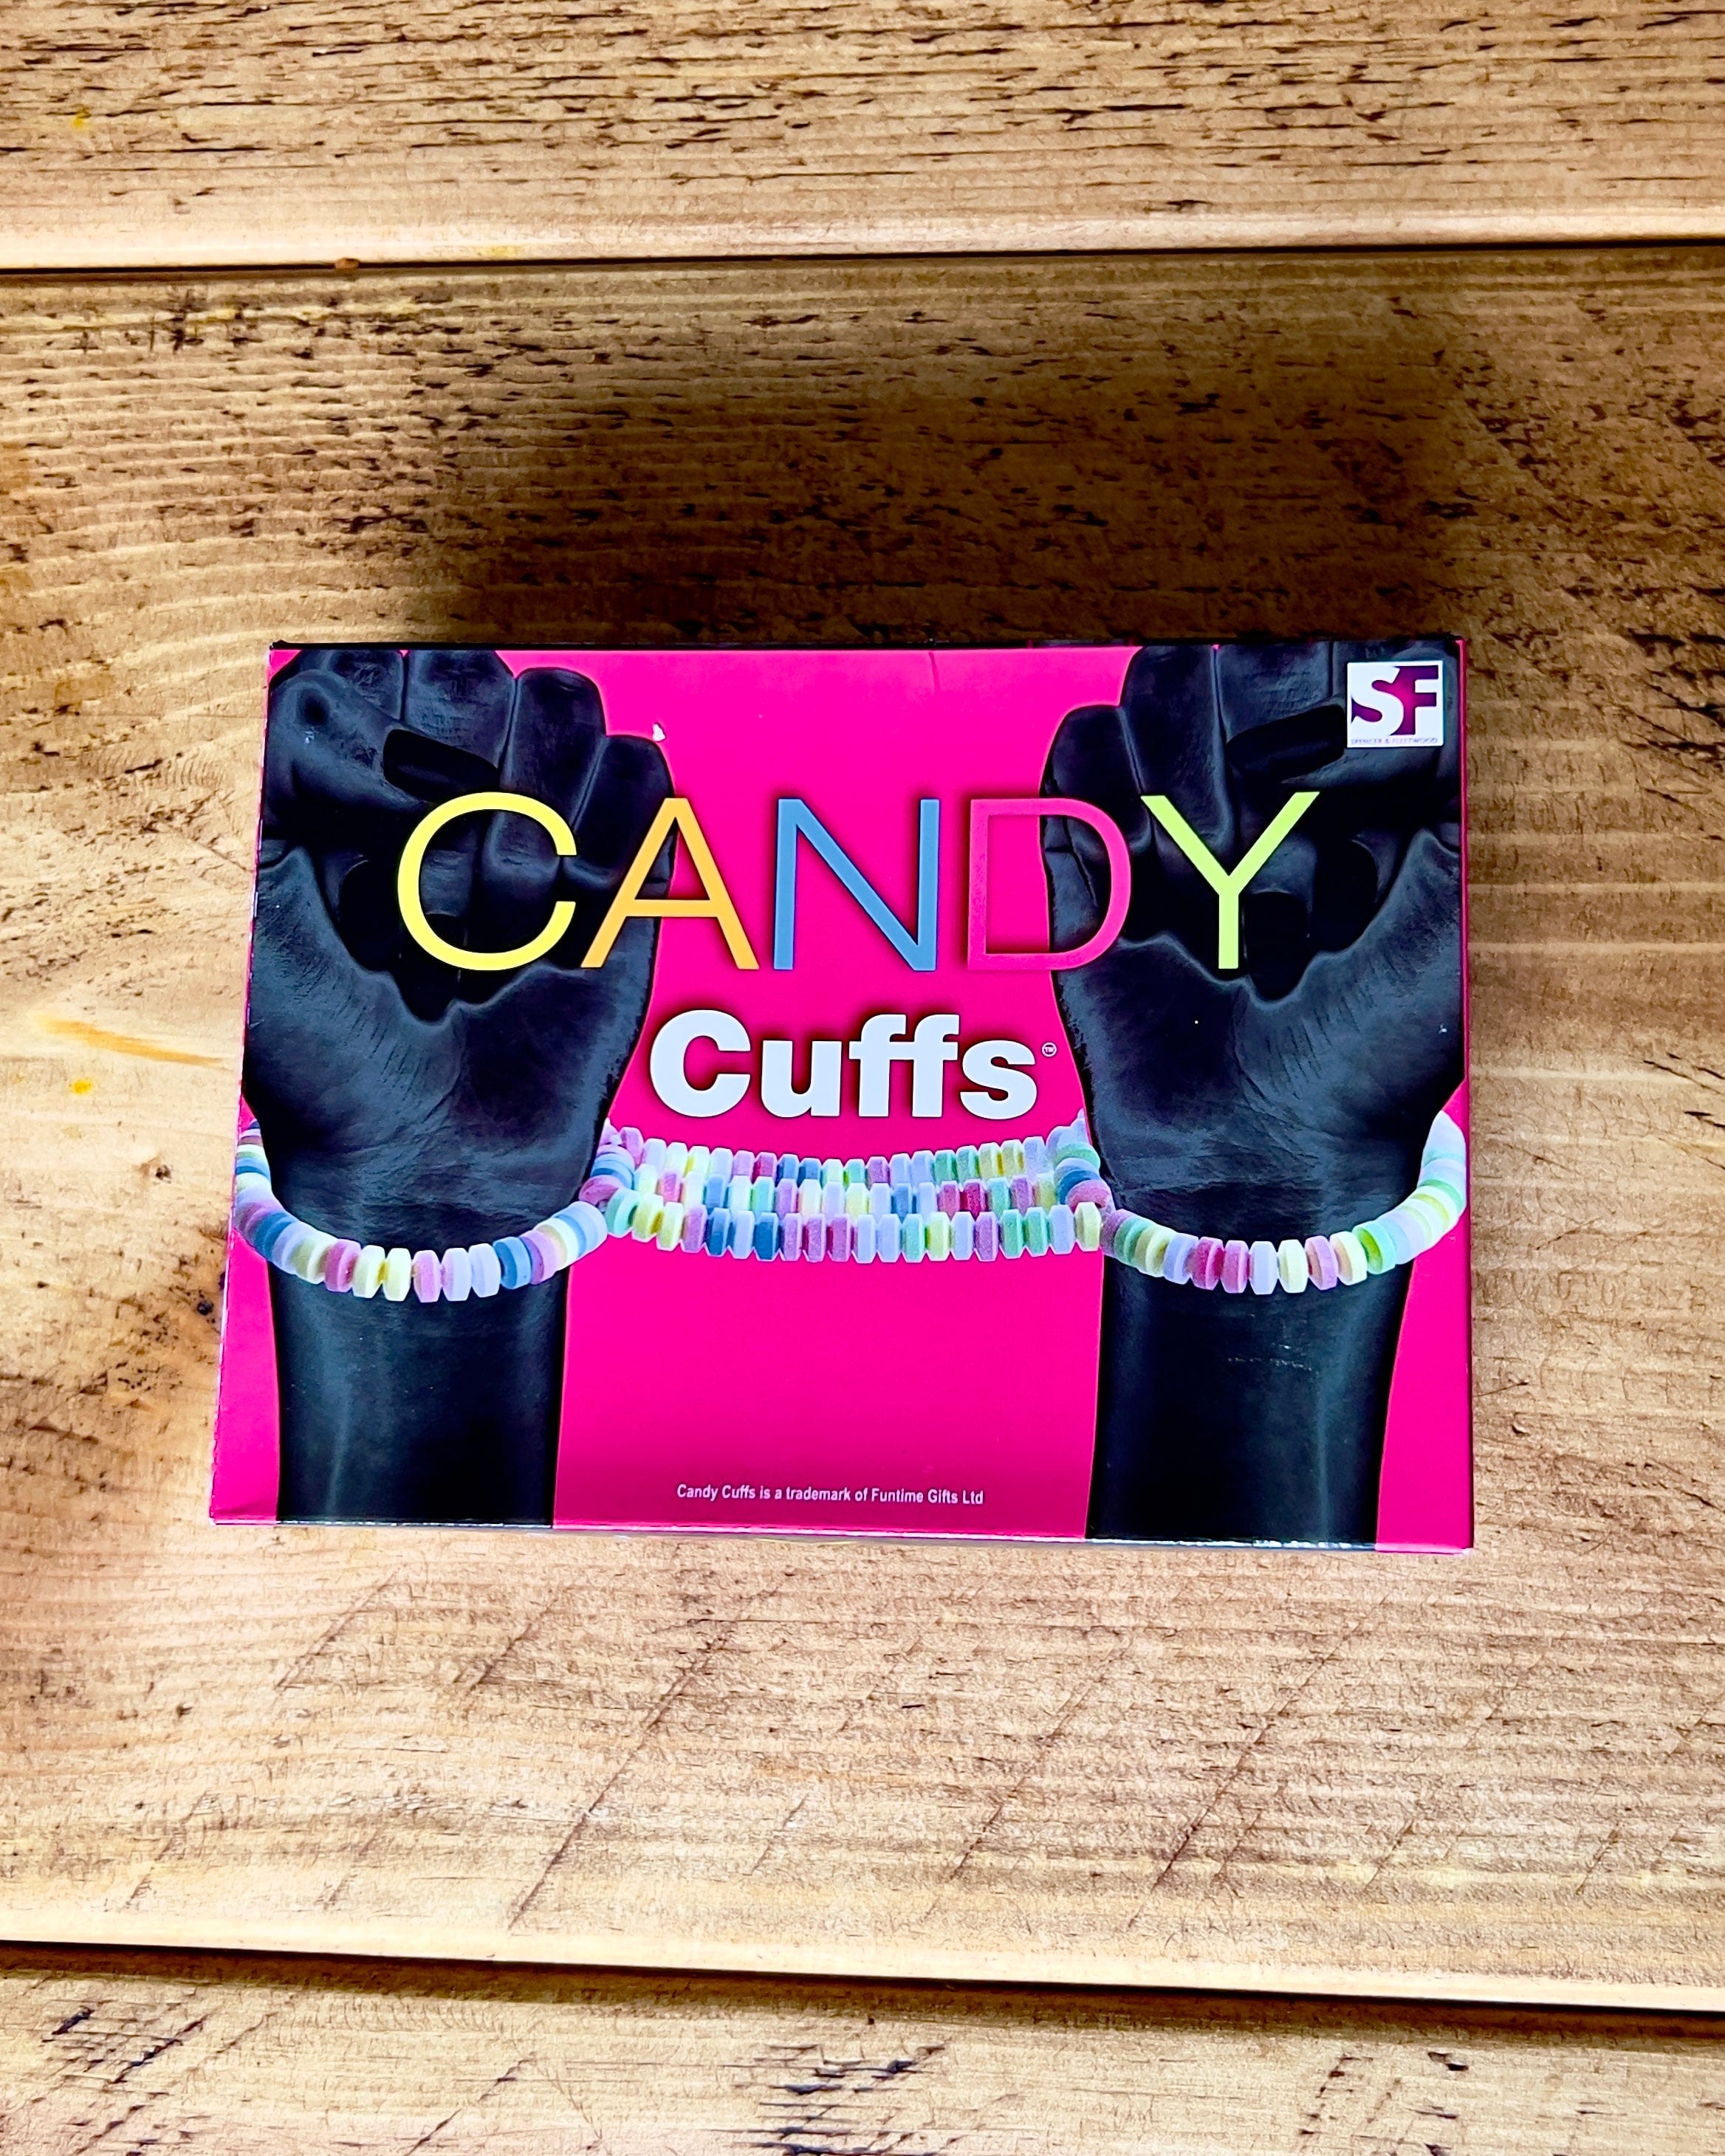 Candy Cuffs - adult novelty snacks